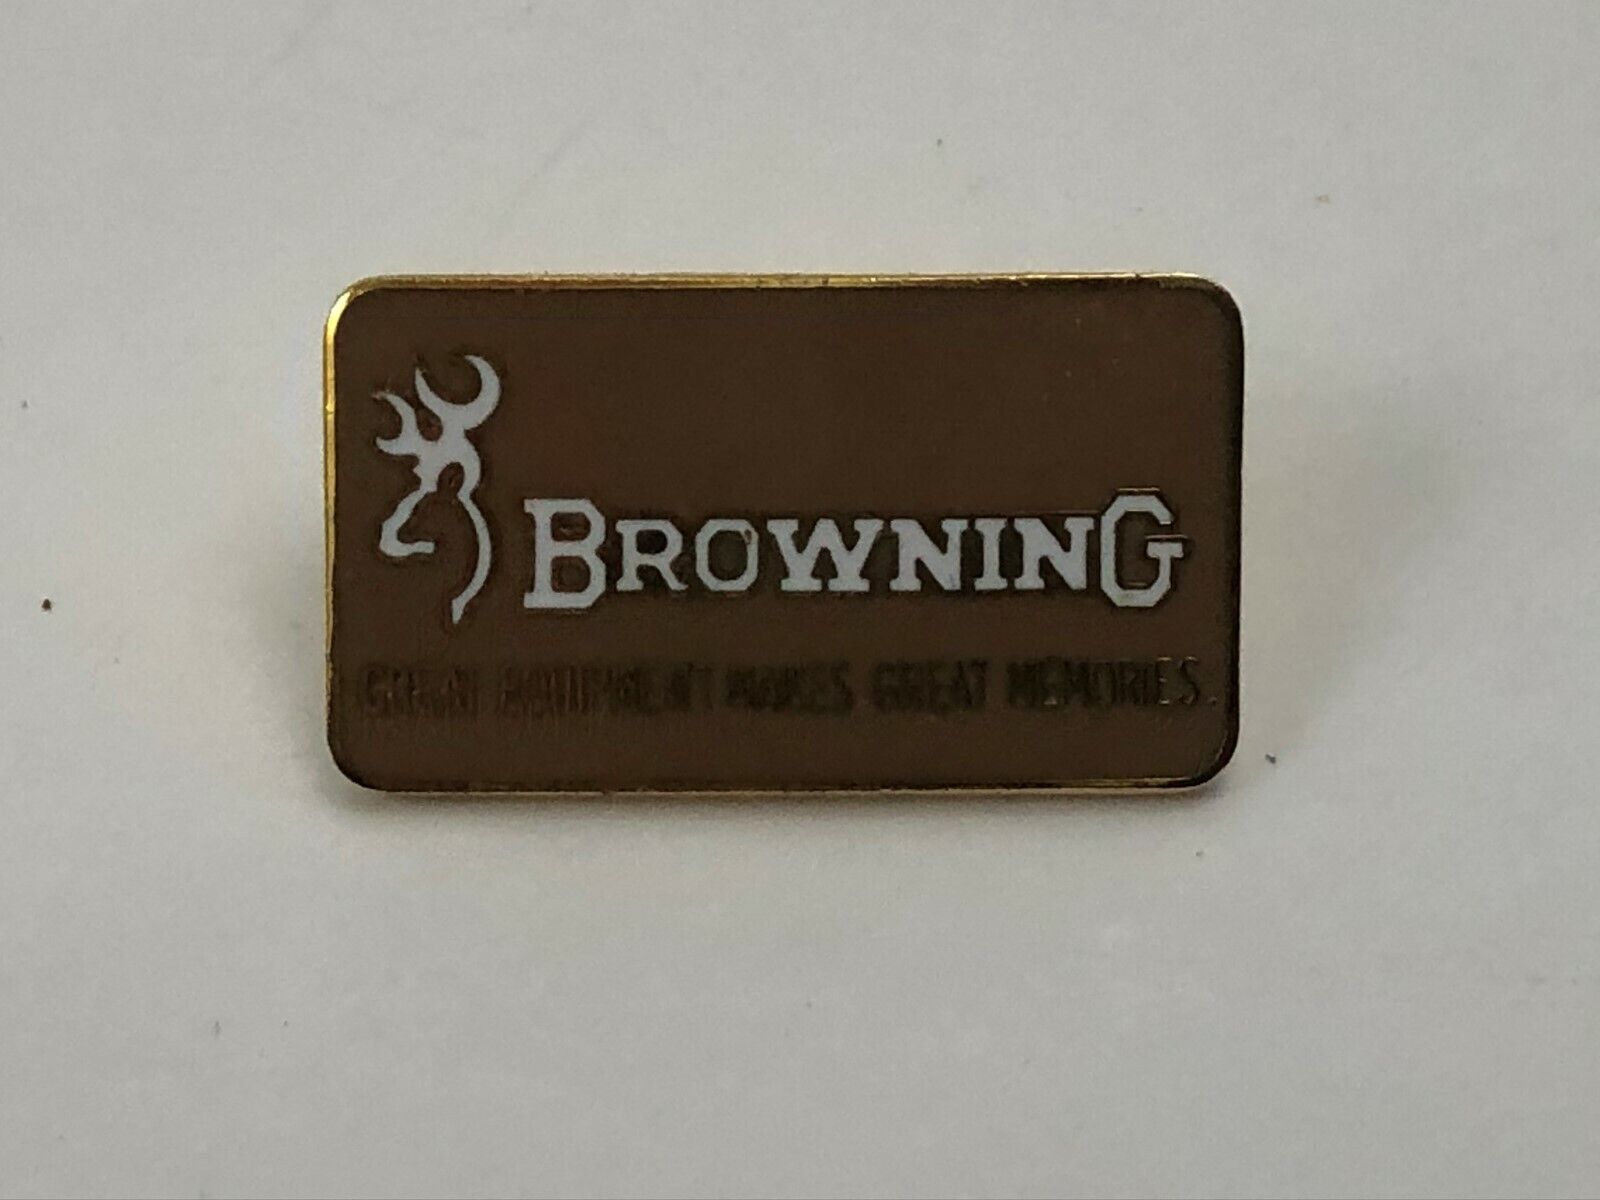 Browning Firearms Advertising Lapel Pin Great Equipment Makes Great Memories